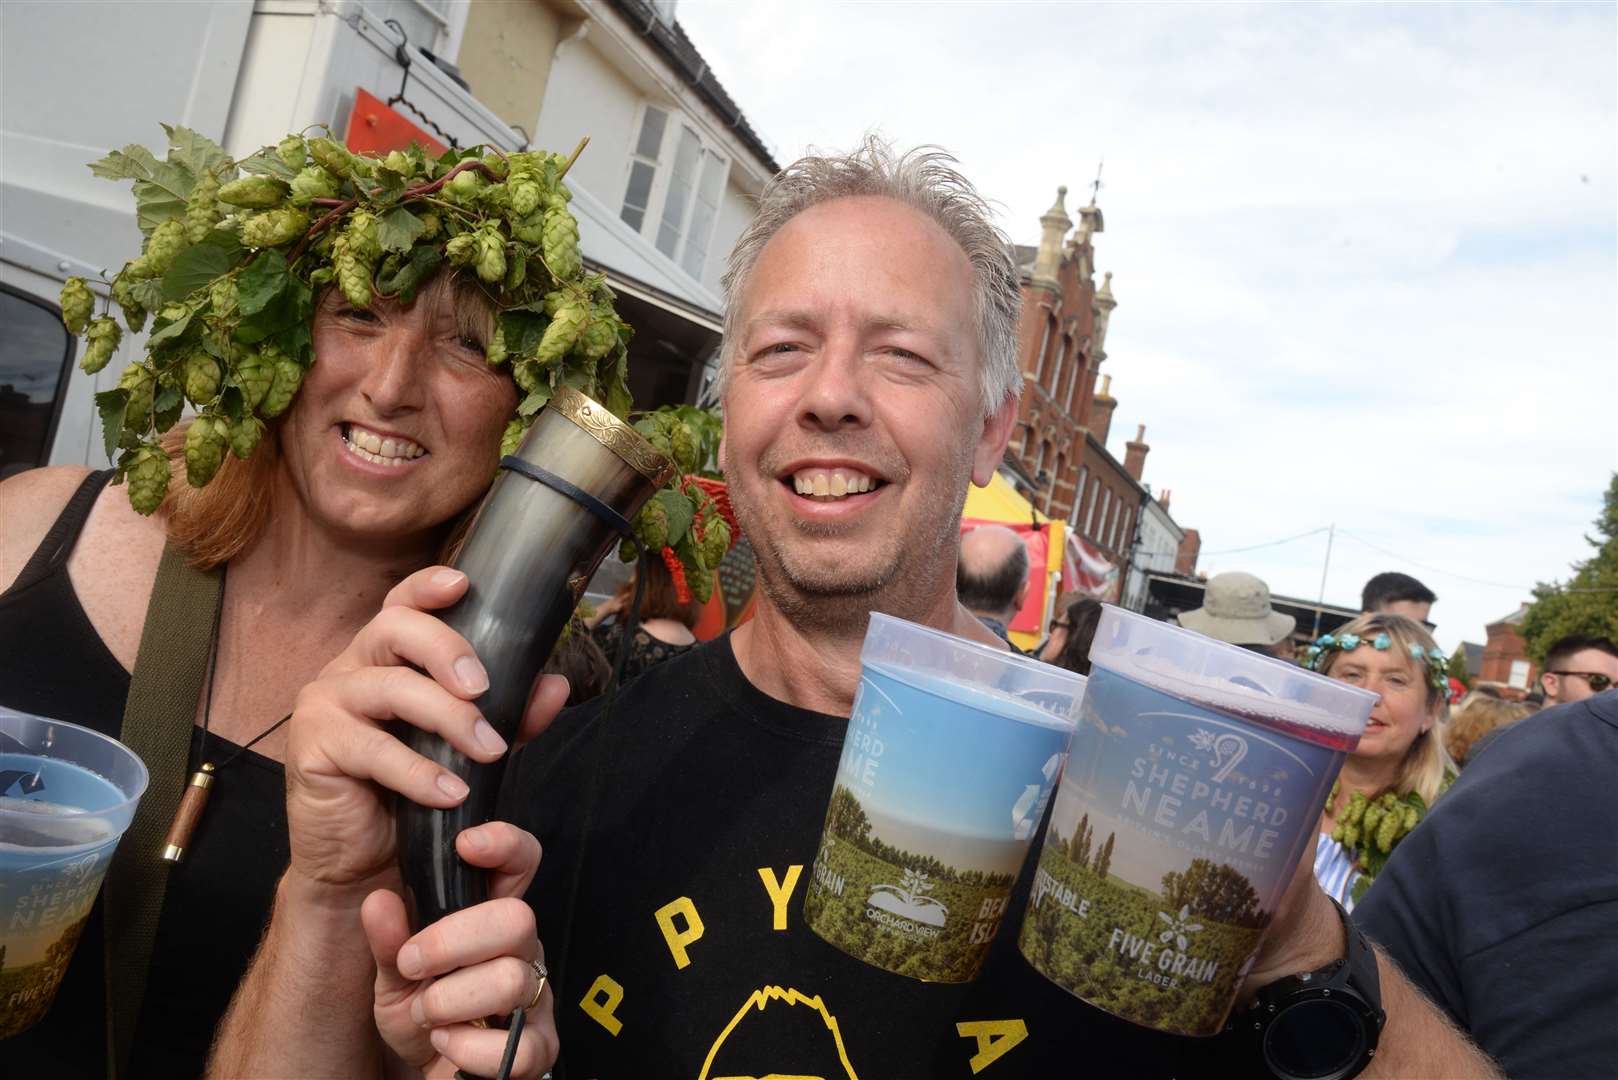 Faversham Hop Festival could be cancelled unless £10,000 is raised by